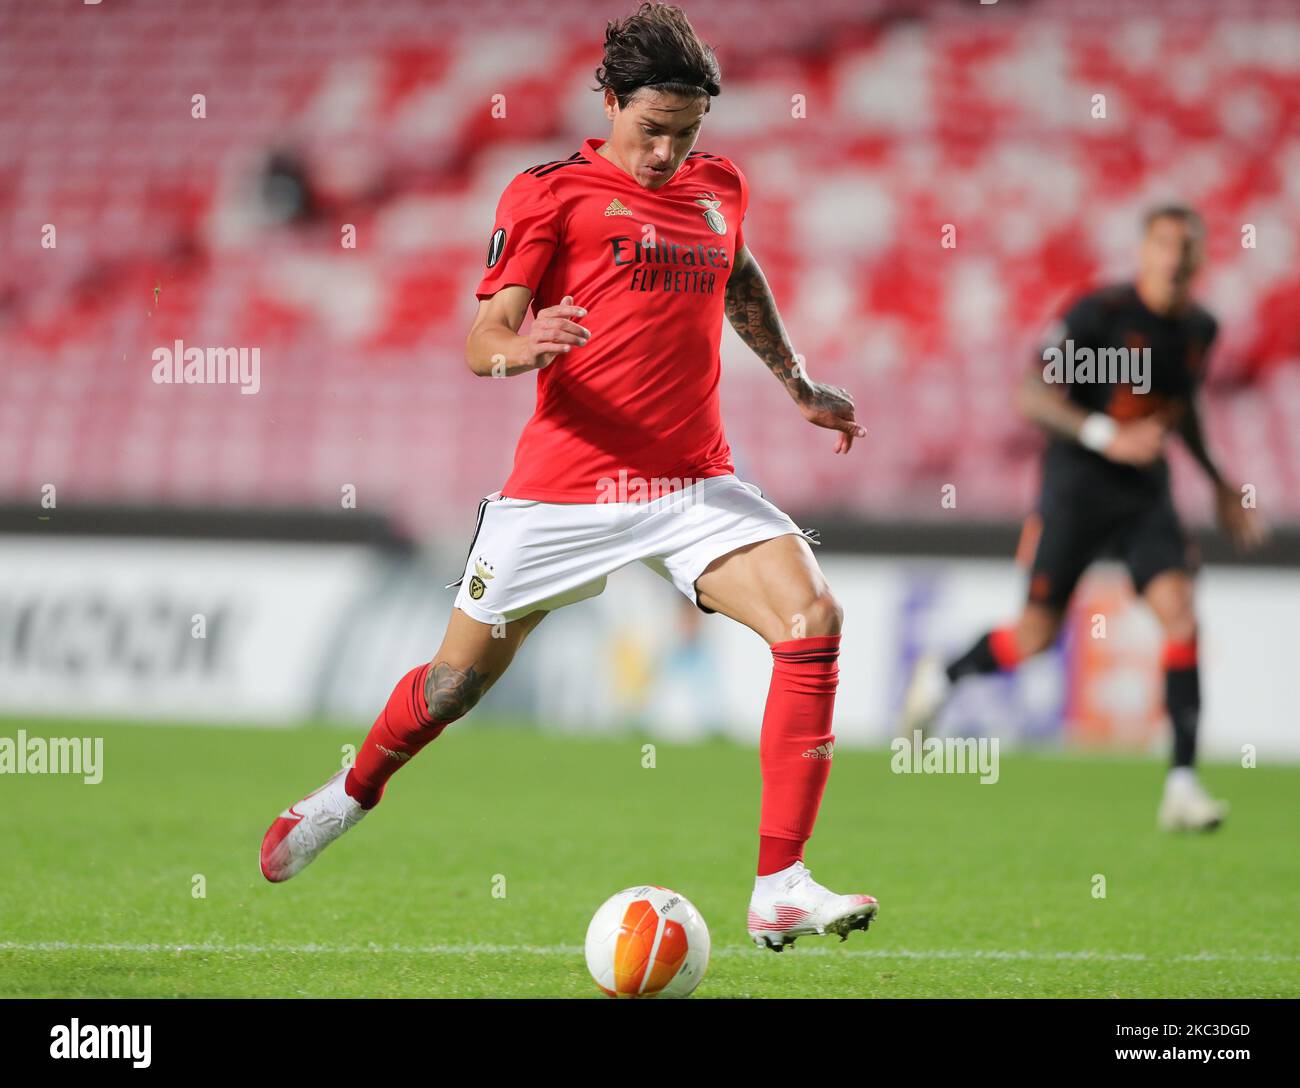 Darwin Nunez Luis of SL Benfica in action during the UEFA Europa League Group D stage match between SL Benfica and Rangers FC at Estadio da Luz on November 5, 2020 in Lisbon, Portugal. (Photo by Paulo Nascimento/NurPhoto) Stock Photo